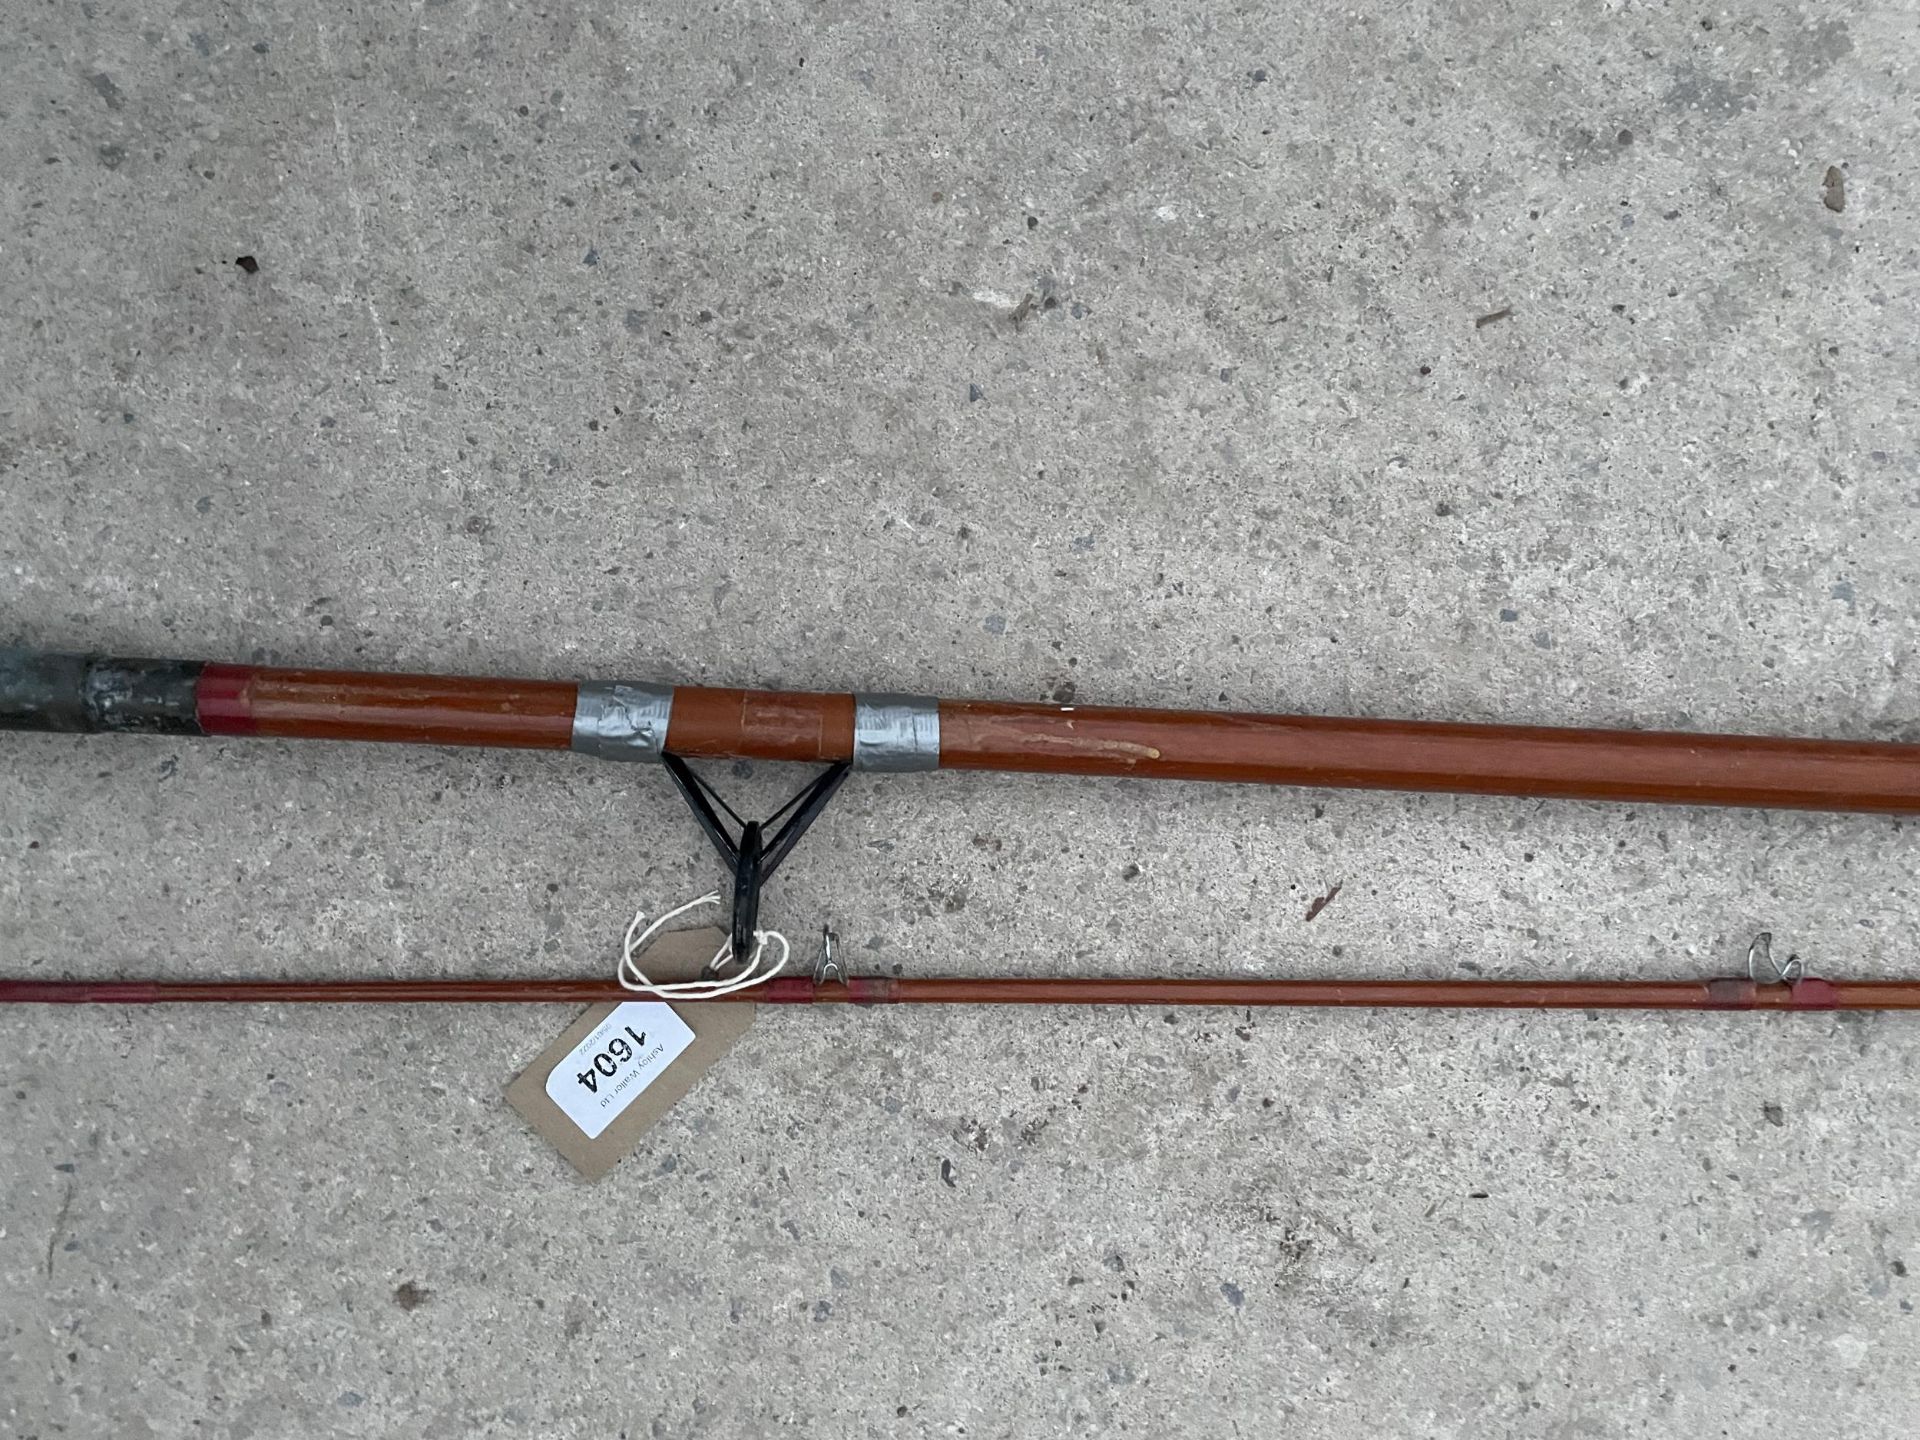 A TWO PIECE AUGER BEACH CASTER ROD - 12' - Image 2 of 2